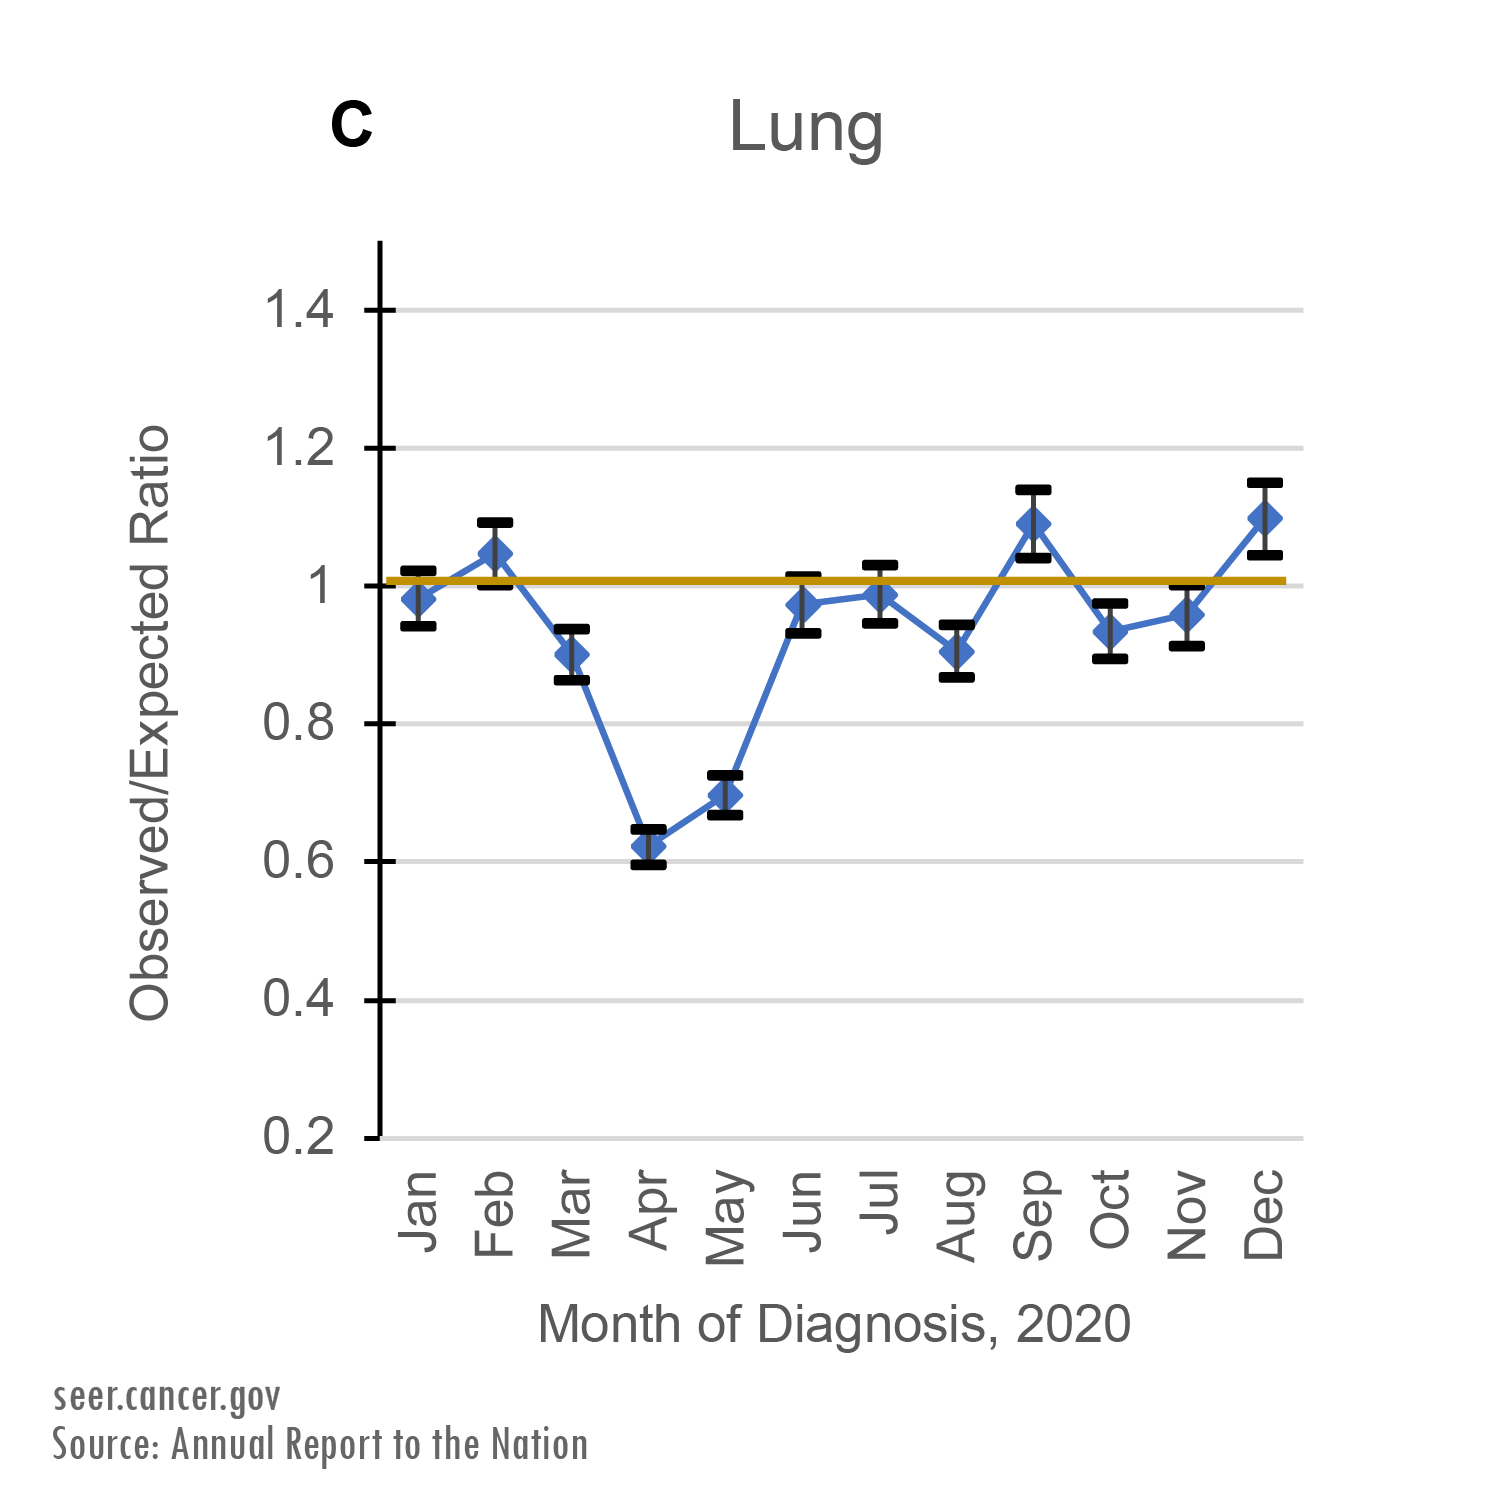 Observed/Expected Ratio of Lung cancer diagnoses by Month of Diagnosis, 2020